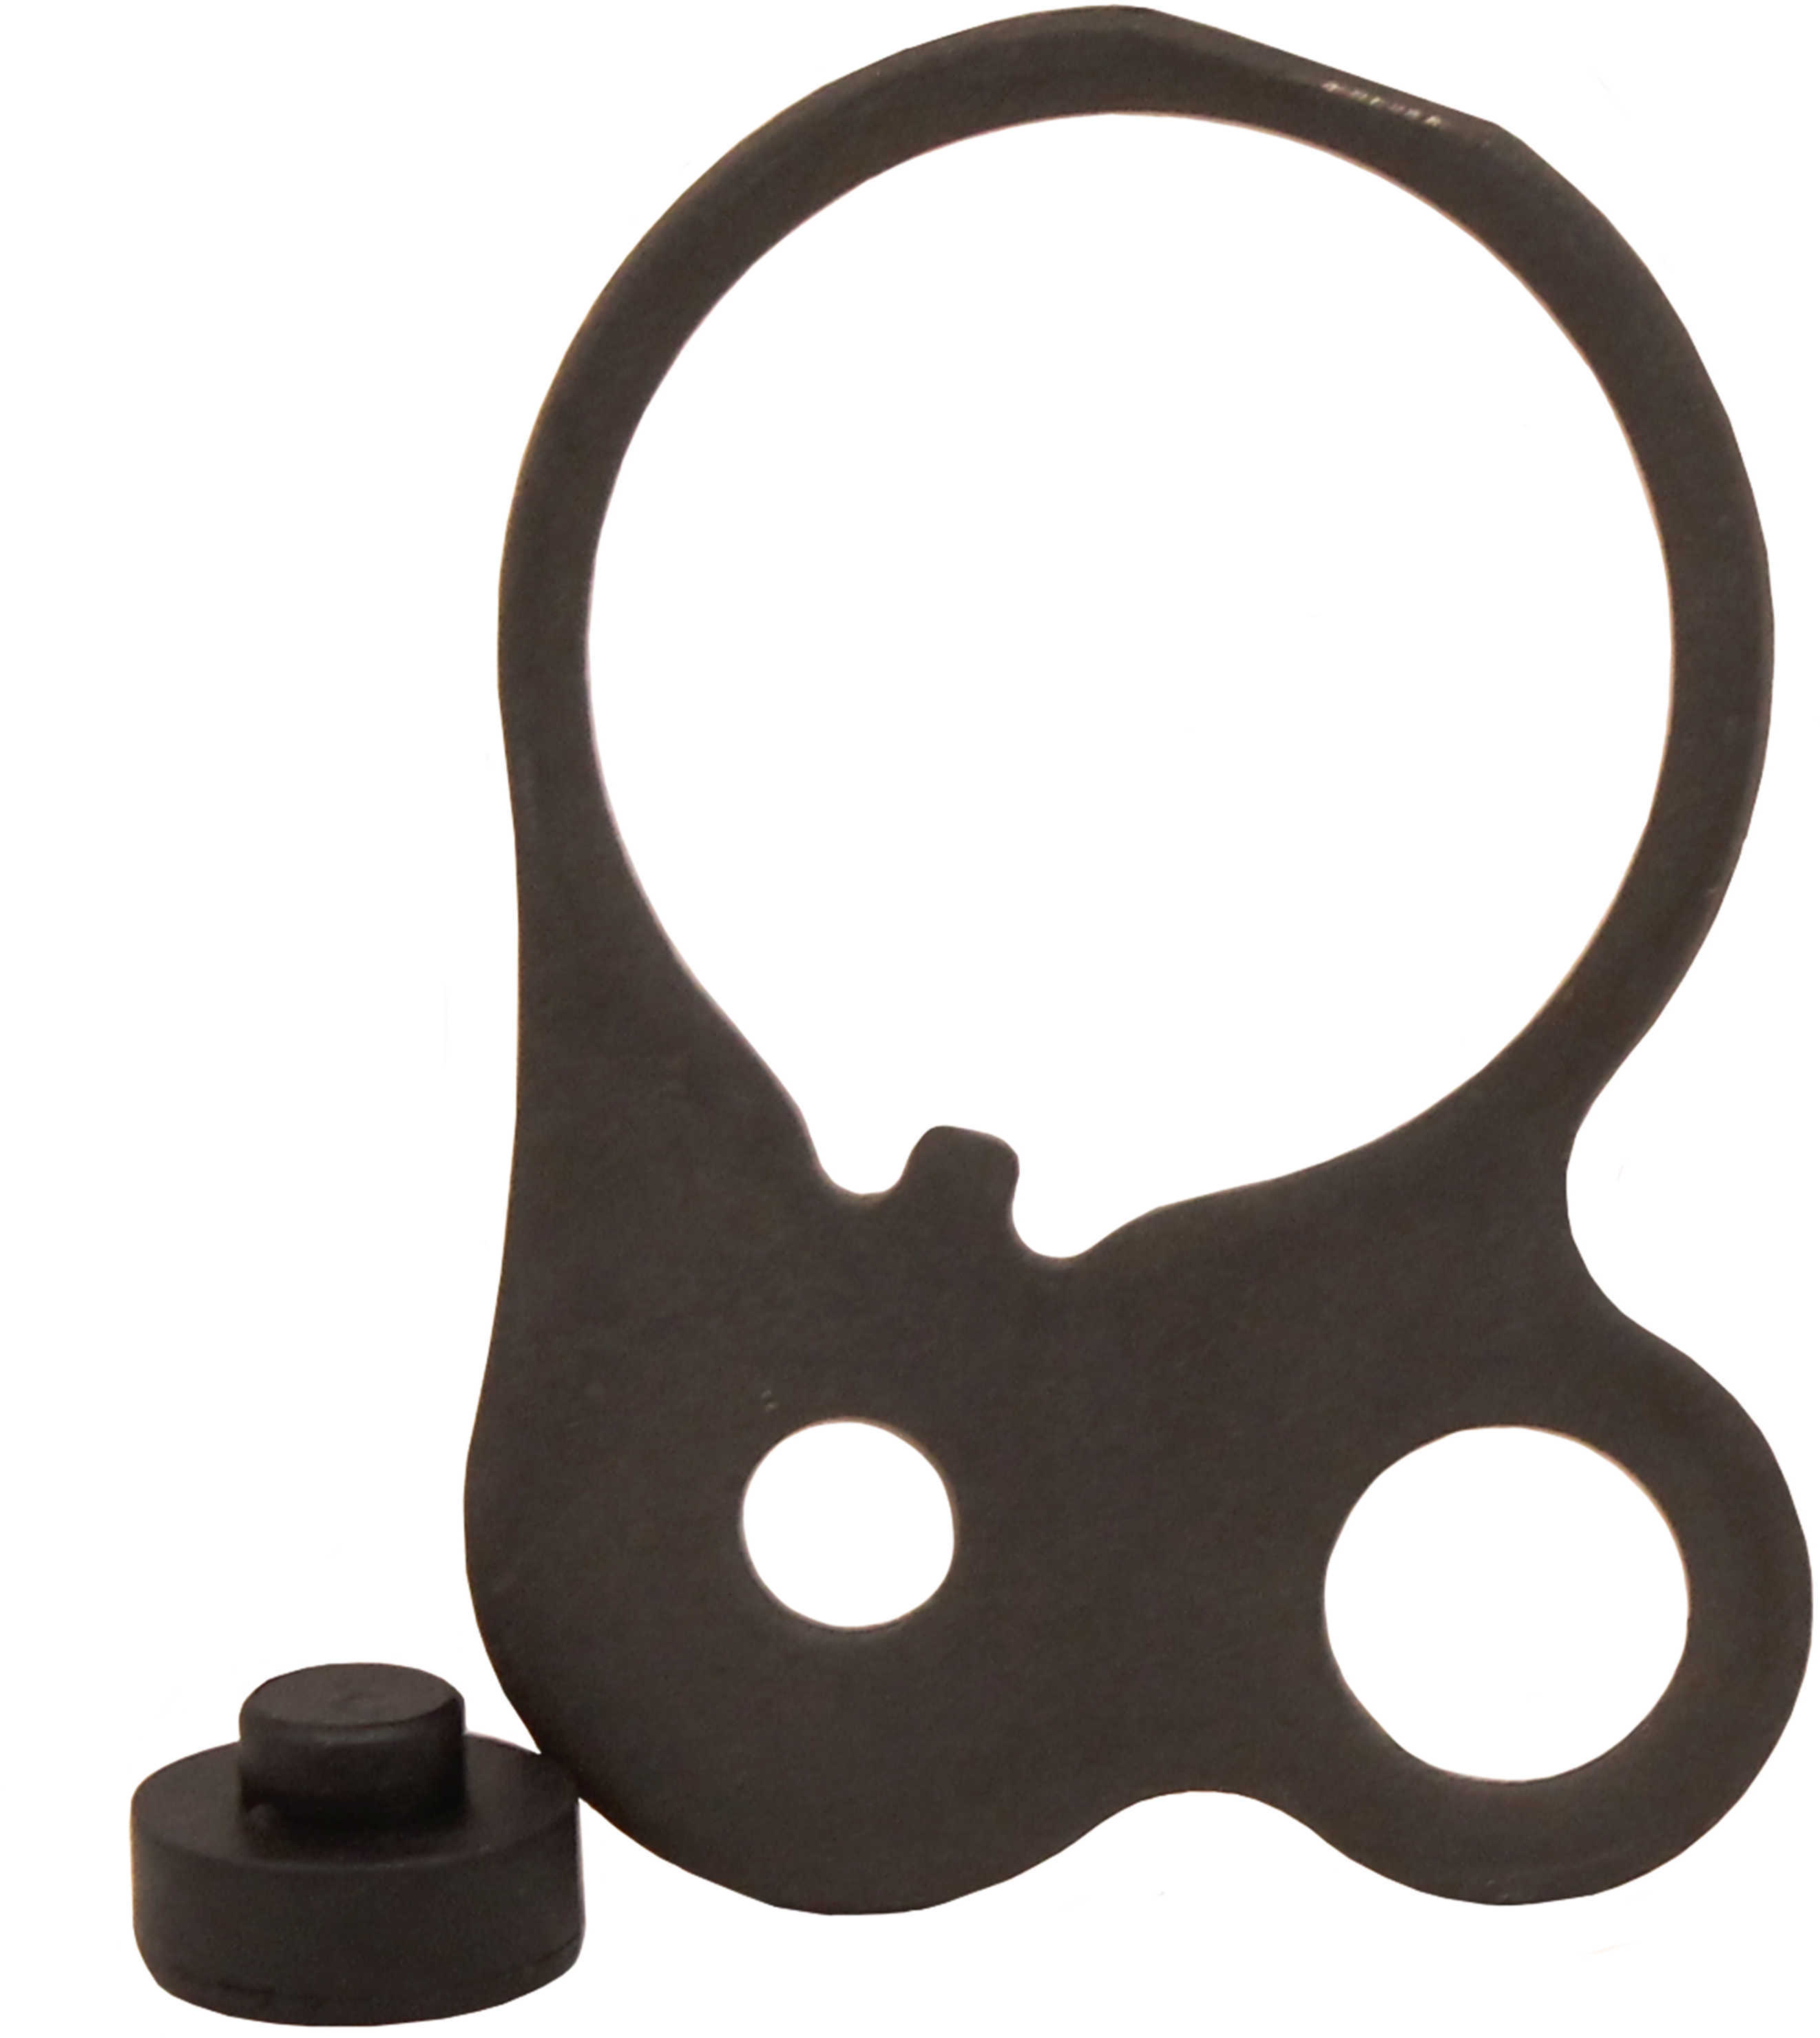 Promag Sling Single Loop Attachment Plate AR15